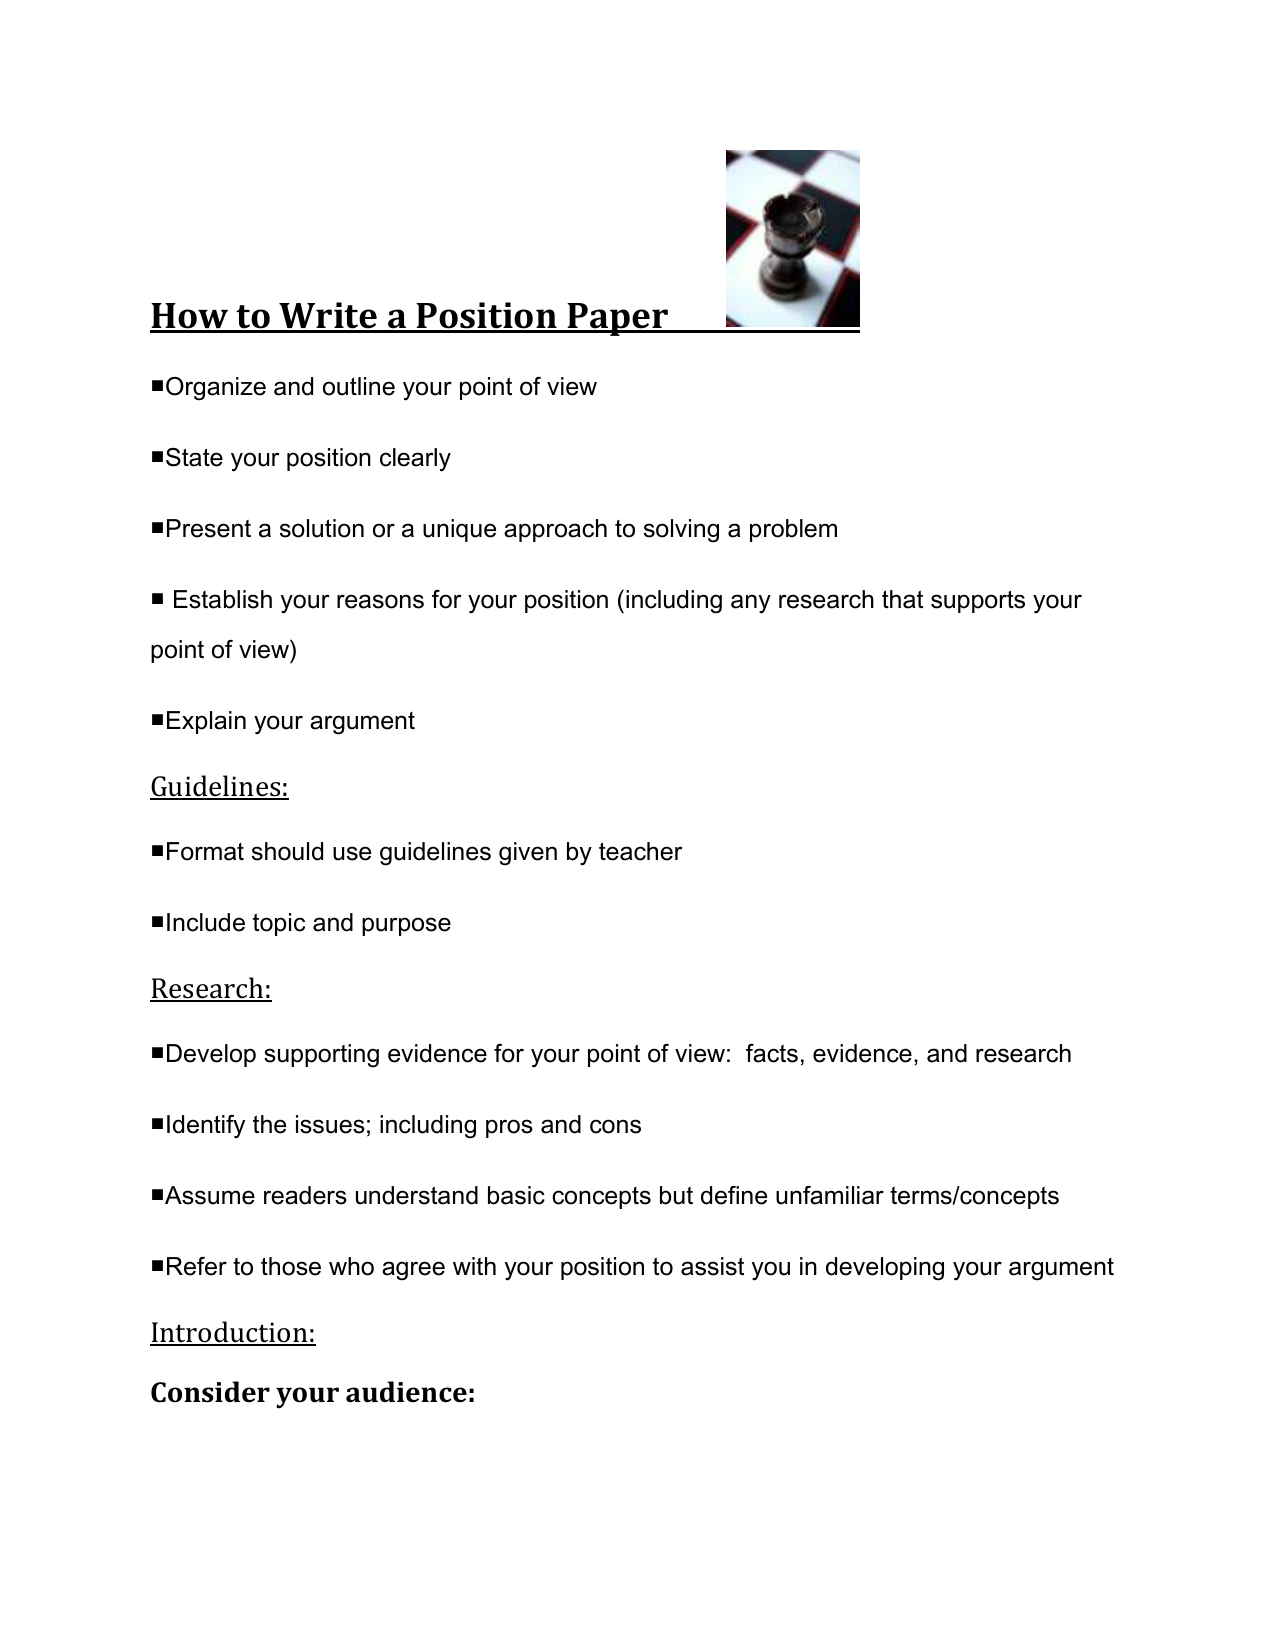 How to Write a Position Paper (with Pictures) - wikiHow